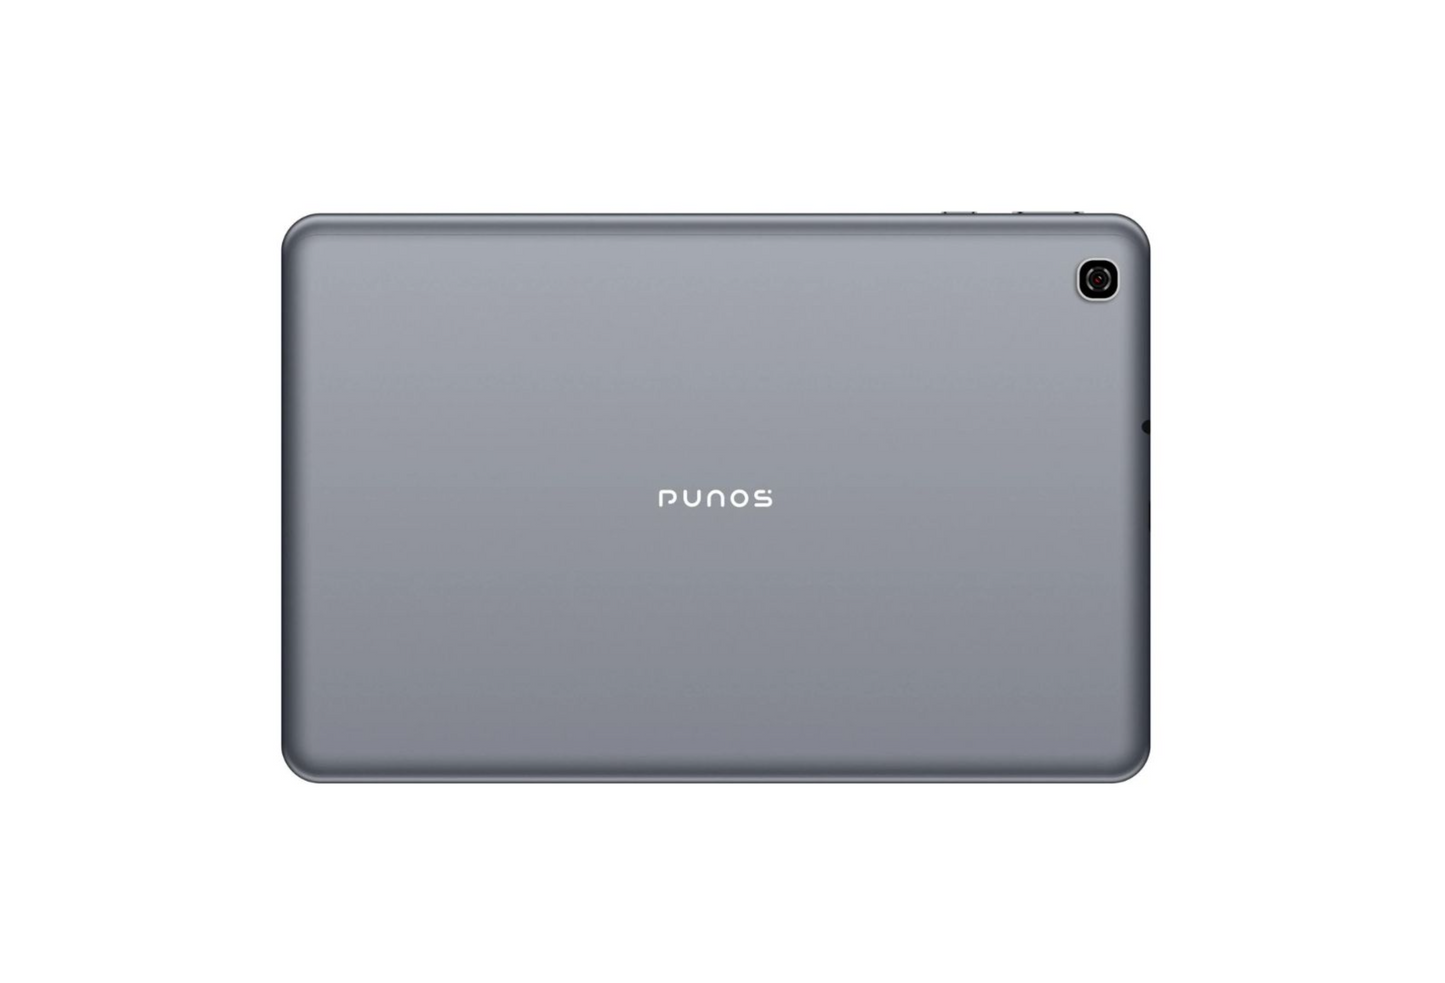 Punos X10 10.1" IPS Tablet 16GB - Grey (WiFi Only)